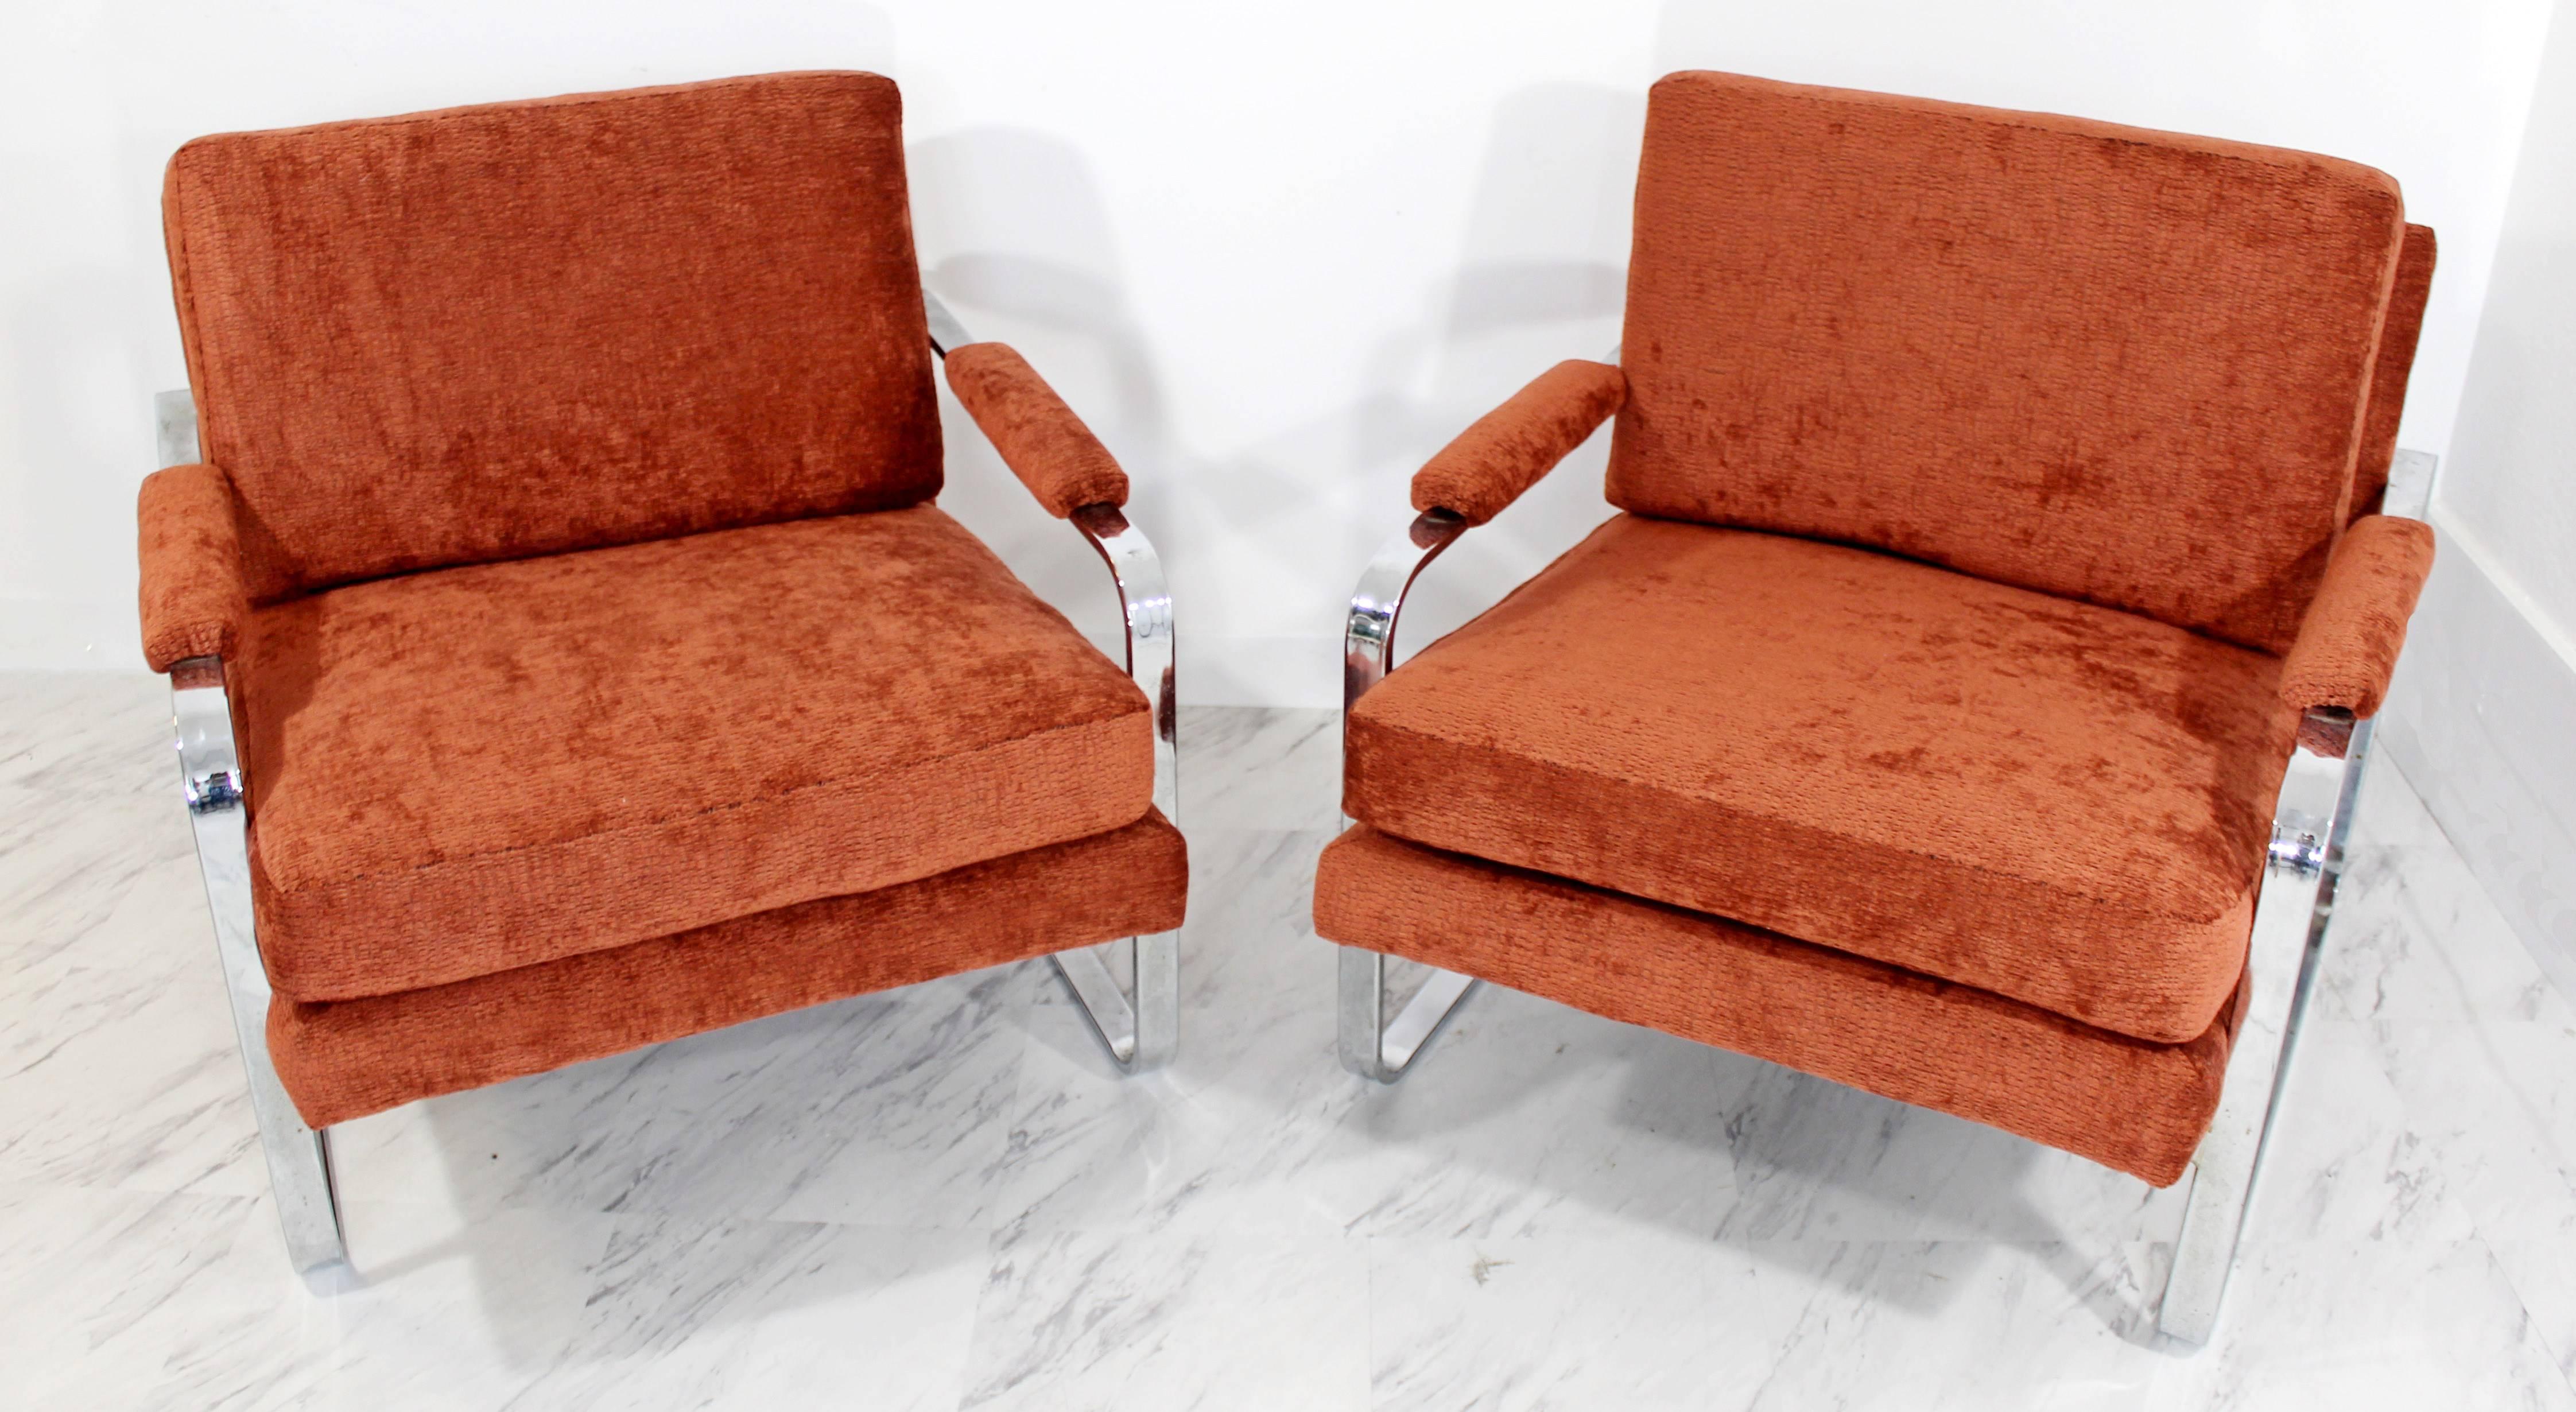 For your consideration is a fabulous pair of flat bar chrome lounge chairs with a maroon/ coral chenille upholstery. Professionally reupholstered and in excellent condition. Chrome is also in excellent condition. The dimensions are 30